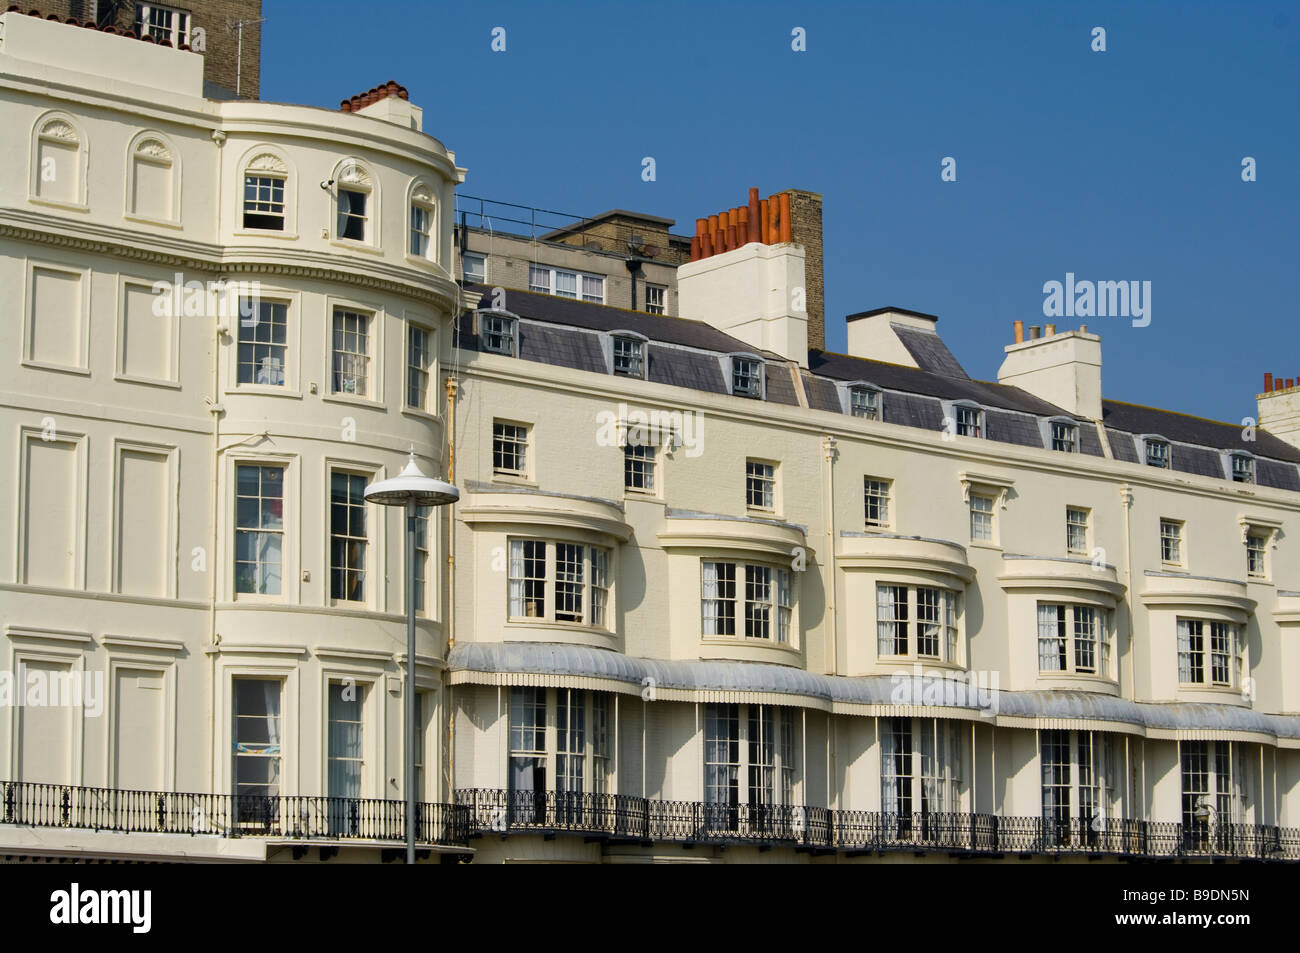 Period Buildings terraced houses In Regency Square Brighton East Sussex England Stock Photo